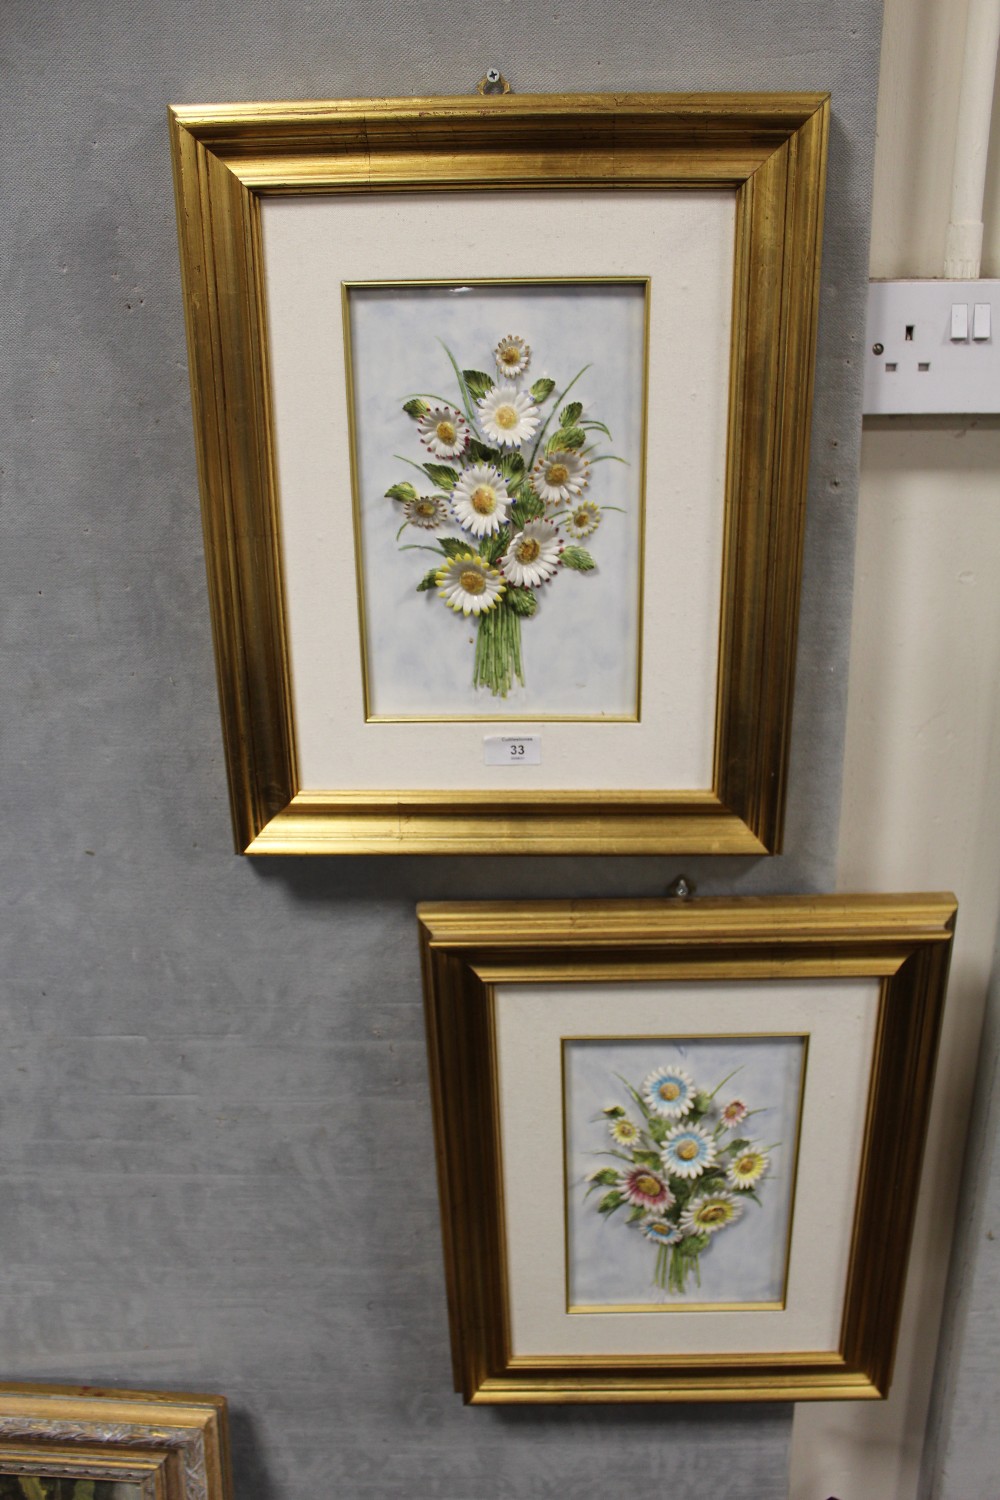 TWO GILT FRAMED 3D PICTURES OF A DAISIES , OVERALL SIZE INCLUDING FRAME 40 X 50 CM